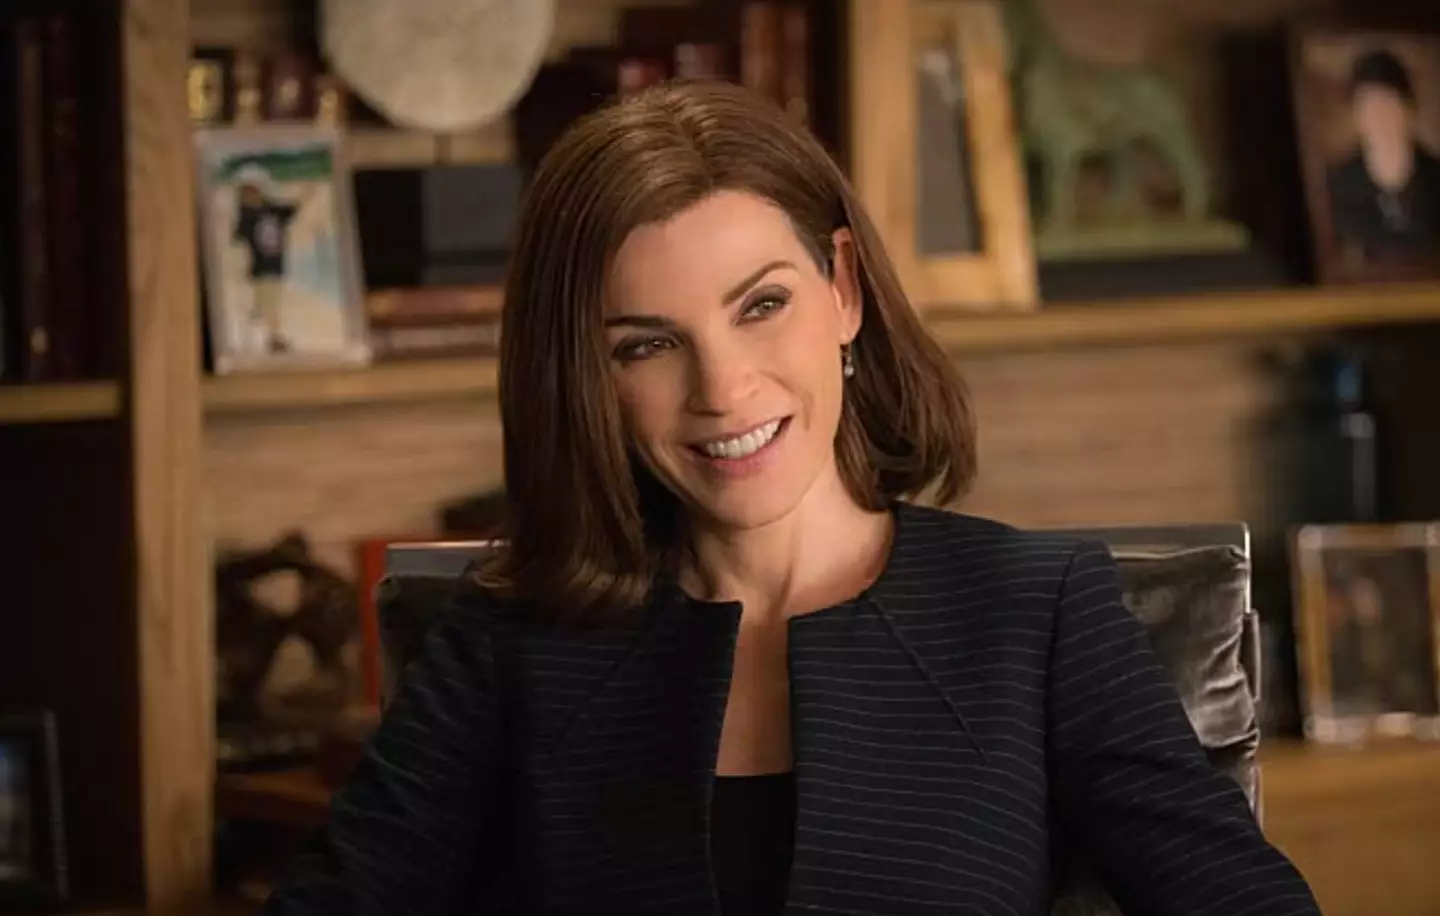 The Good Wife has been suggested by multiple fans of The Lincoln Lawyer.